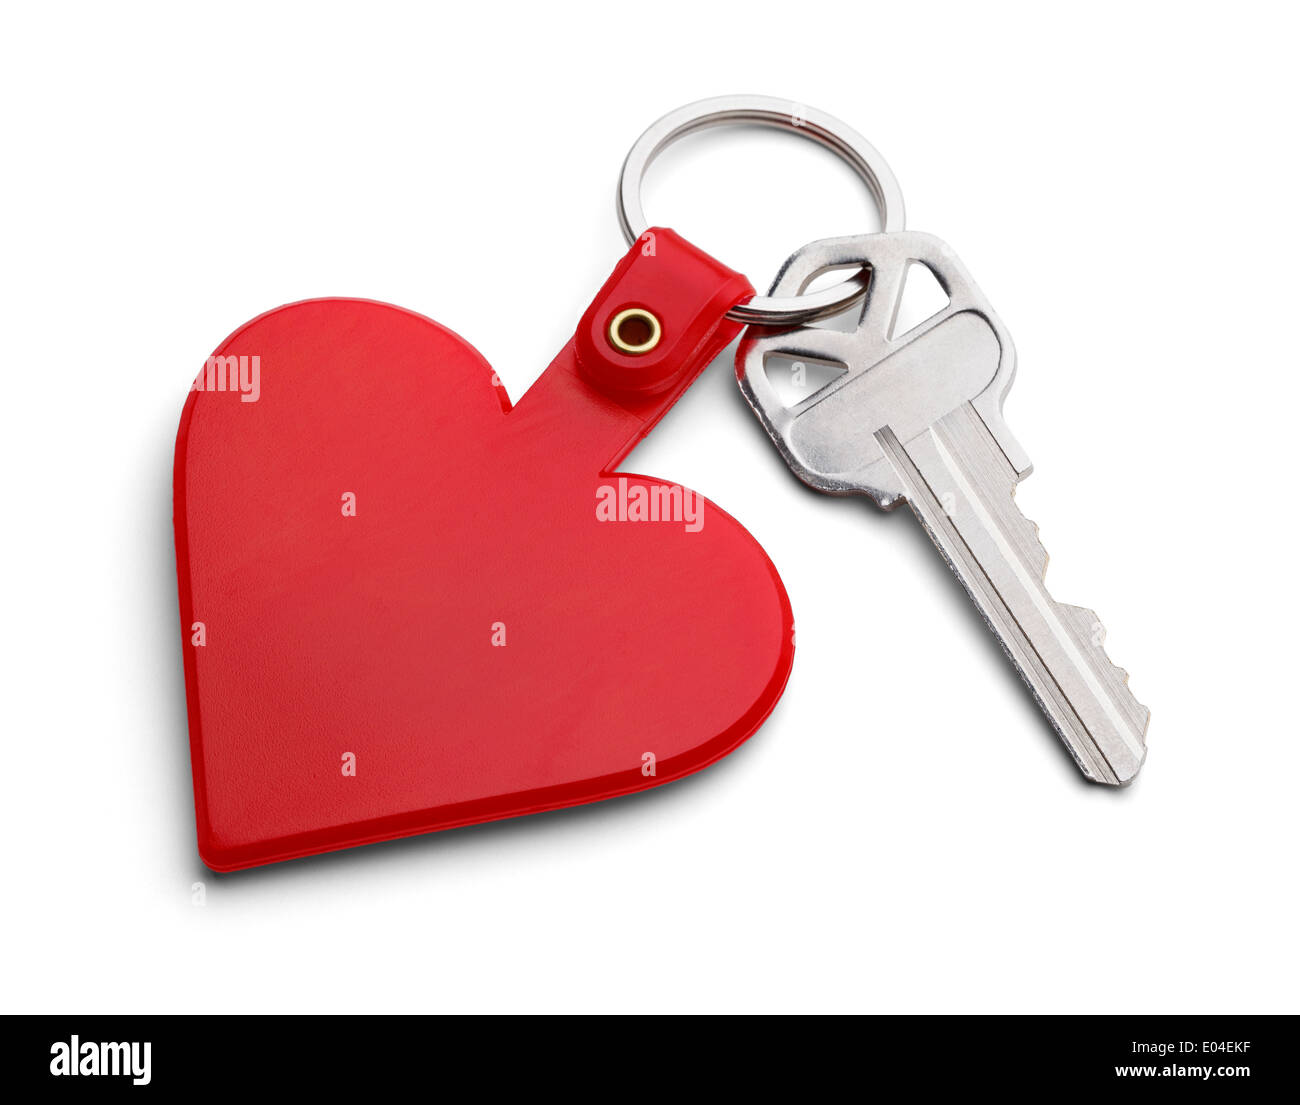 Key with Red Heart Key Chain Isolated on White Background. Stock Photo